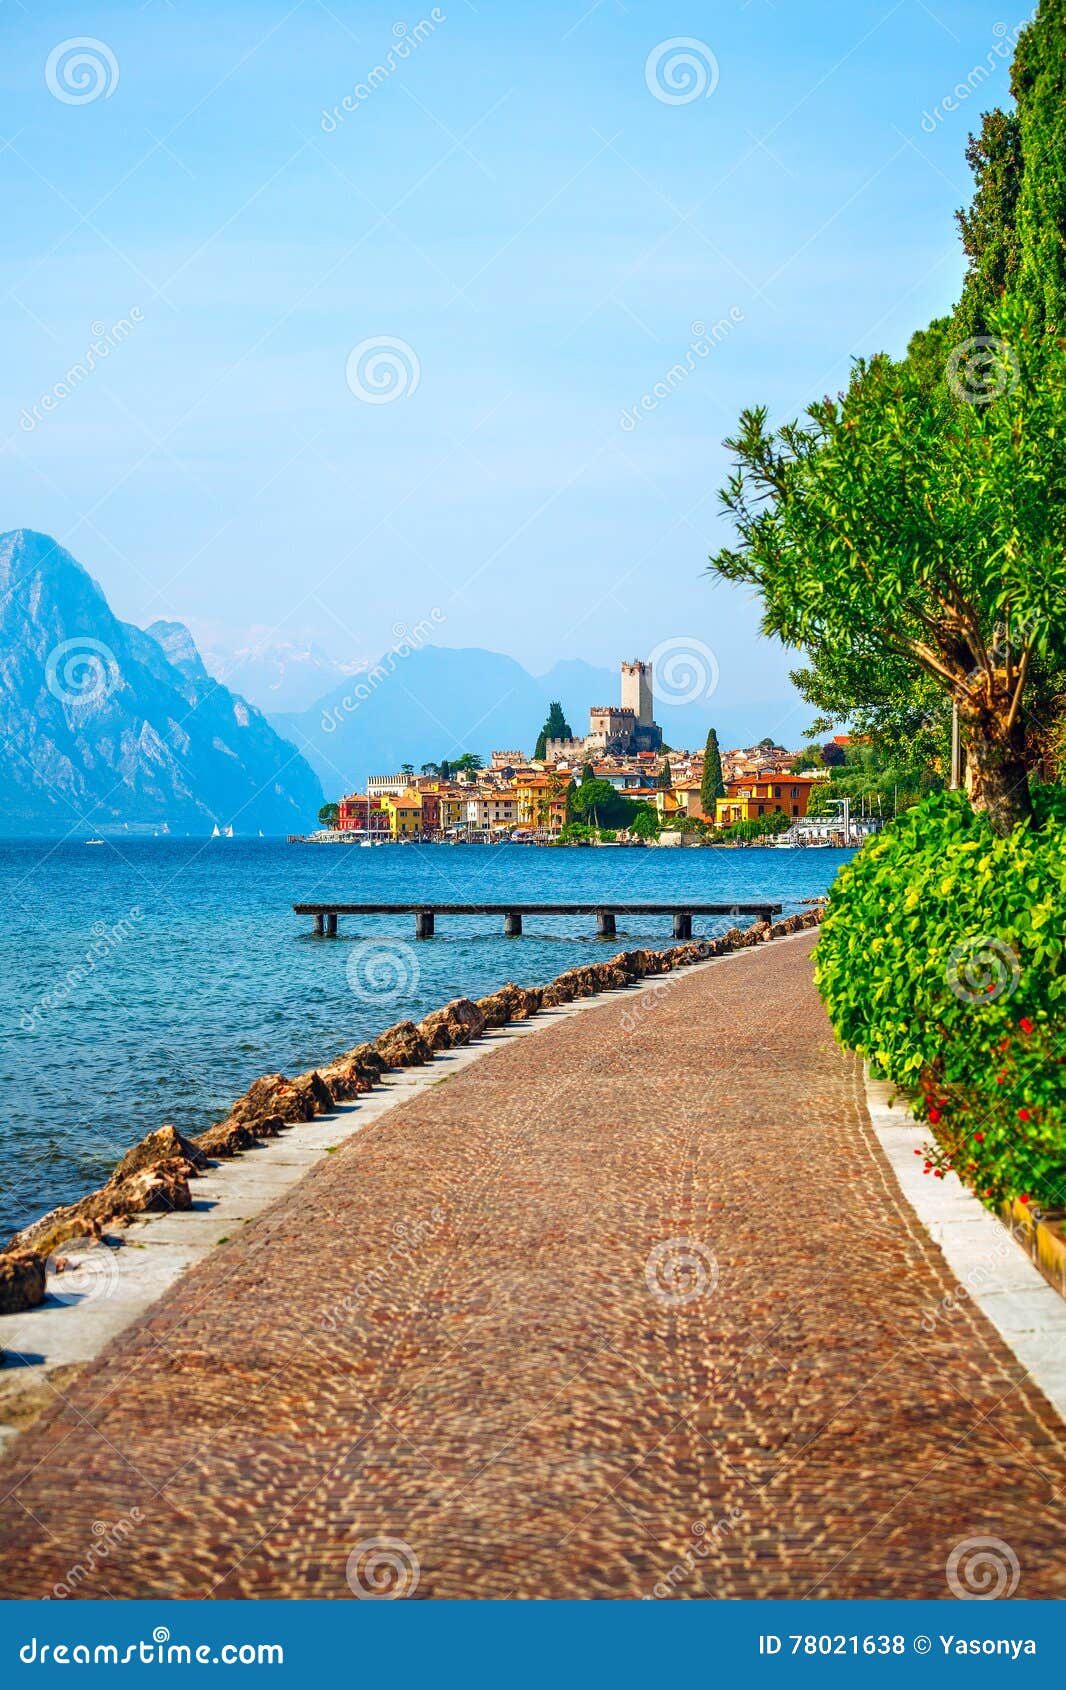 picturesque view to old town malcesine garda